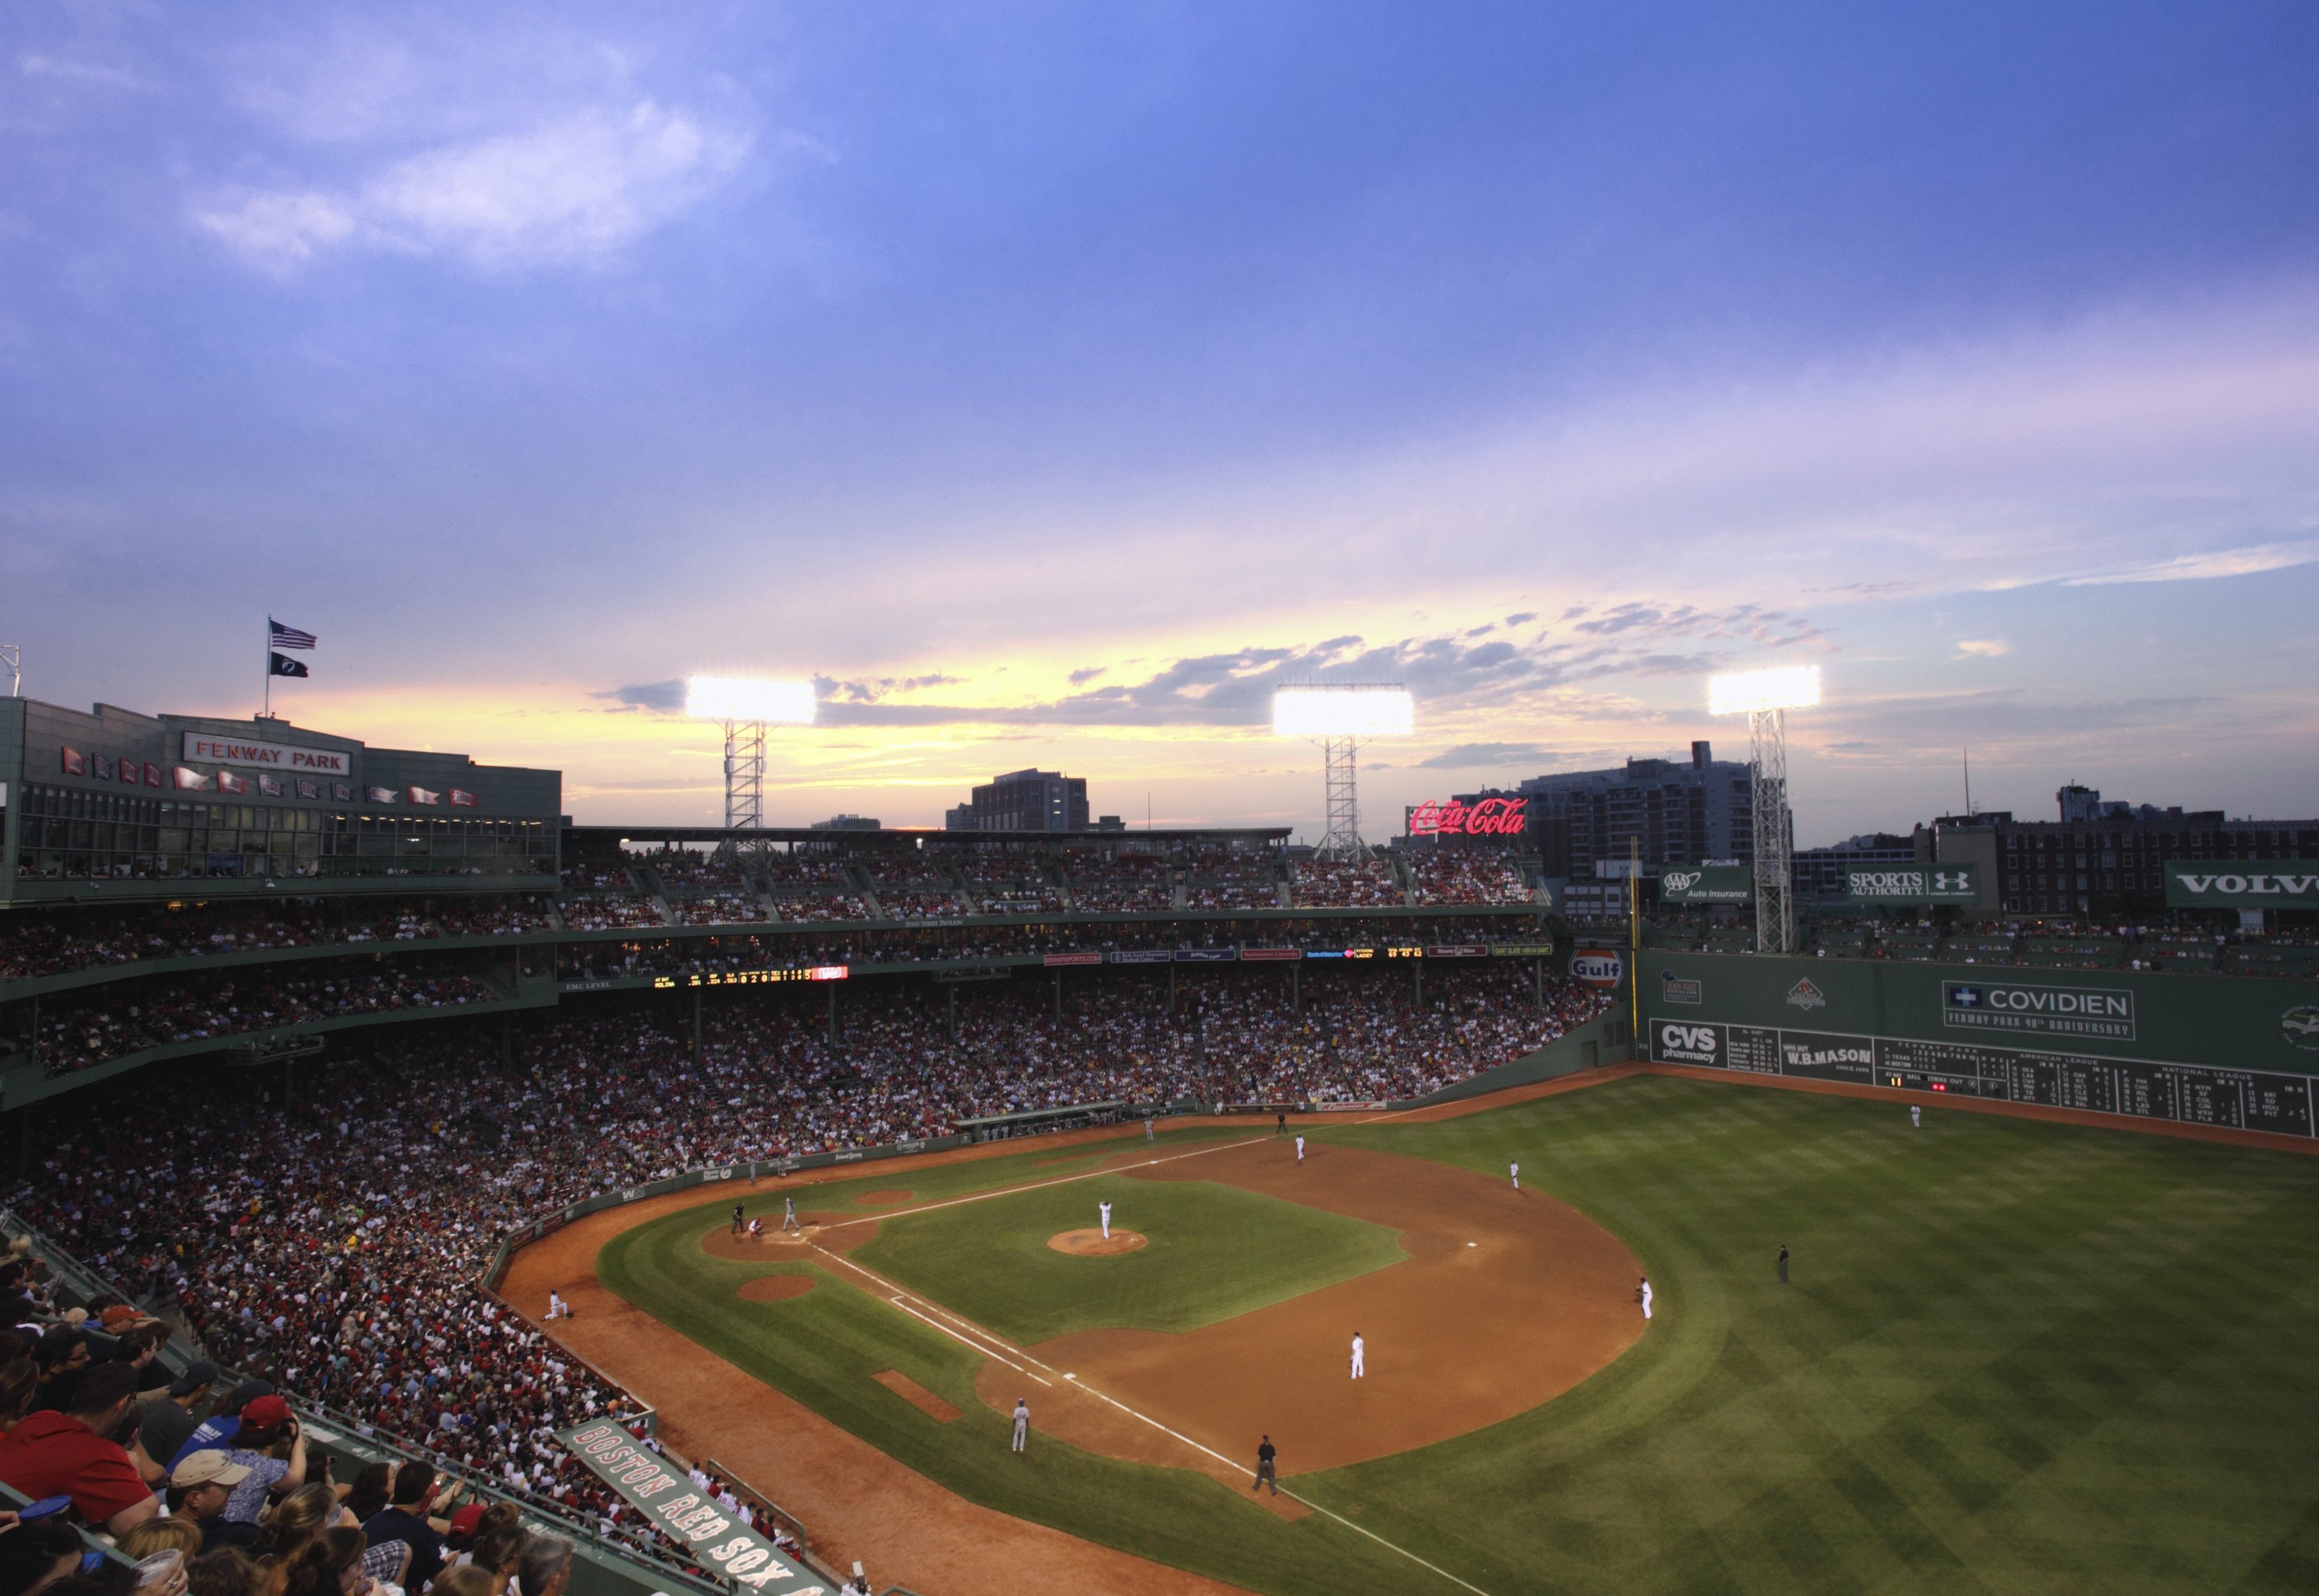 Ranking All 30 MLB Ballparks and Stadiums: From Worst to Best